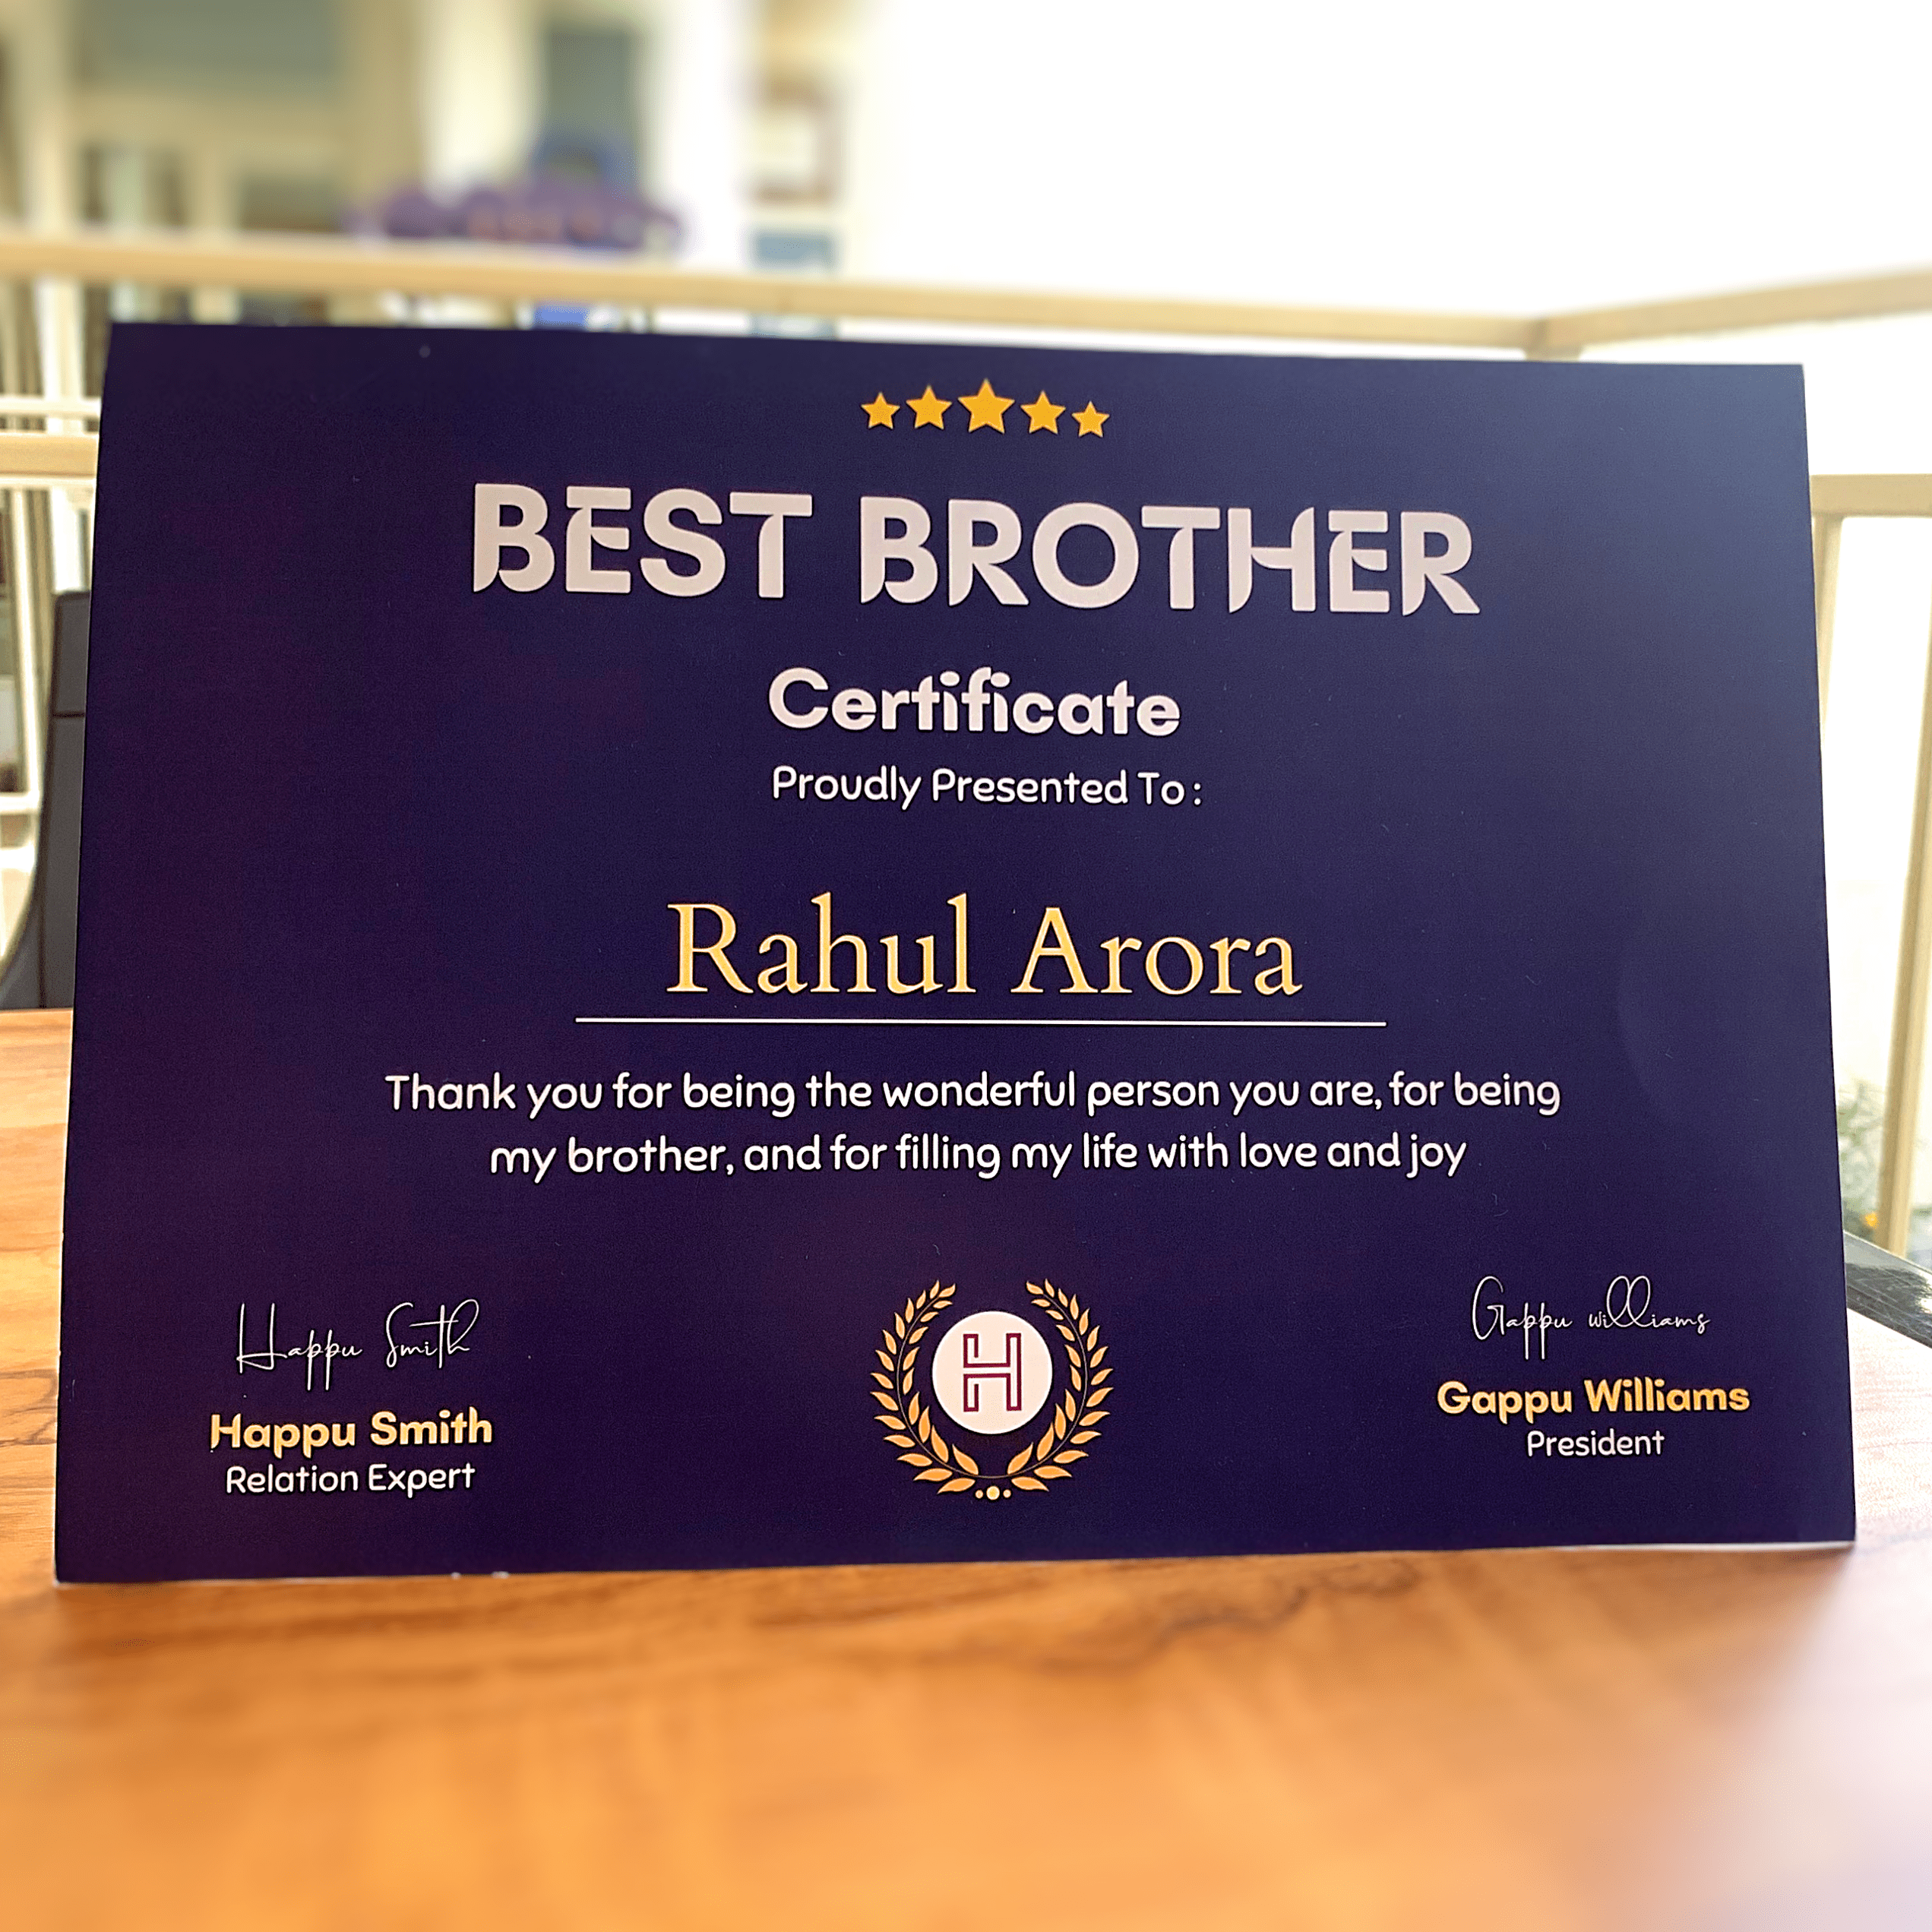 Best brother Certificate photo 1 fotor file-min